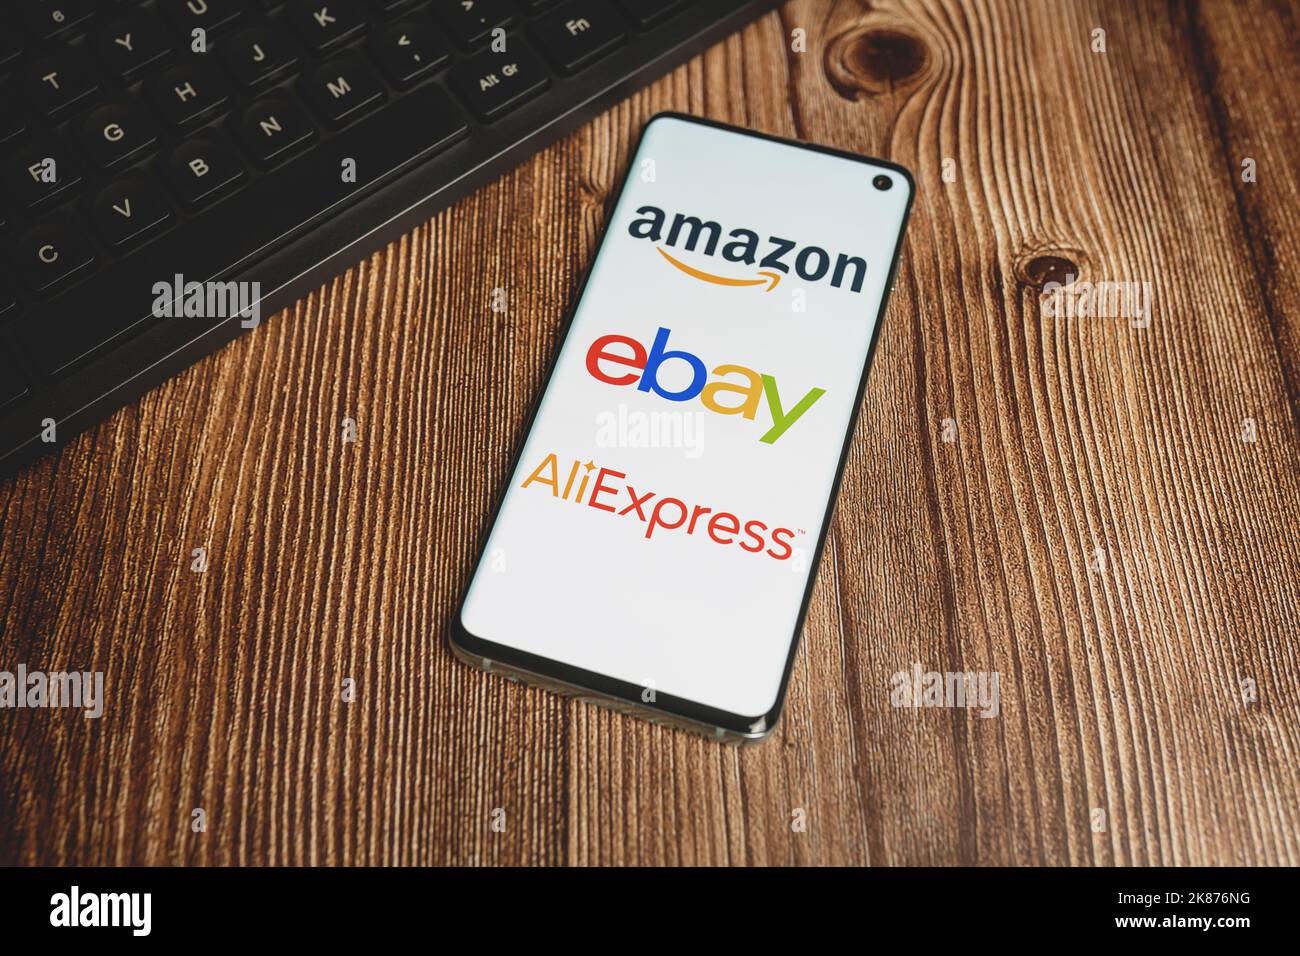 Amazon, Ebay, Aliexpress app logos on smartphone screen and black keyboard on wooden background. Dropshipping concept. Swansea, UK - March 19, 2021 Stock Photo